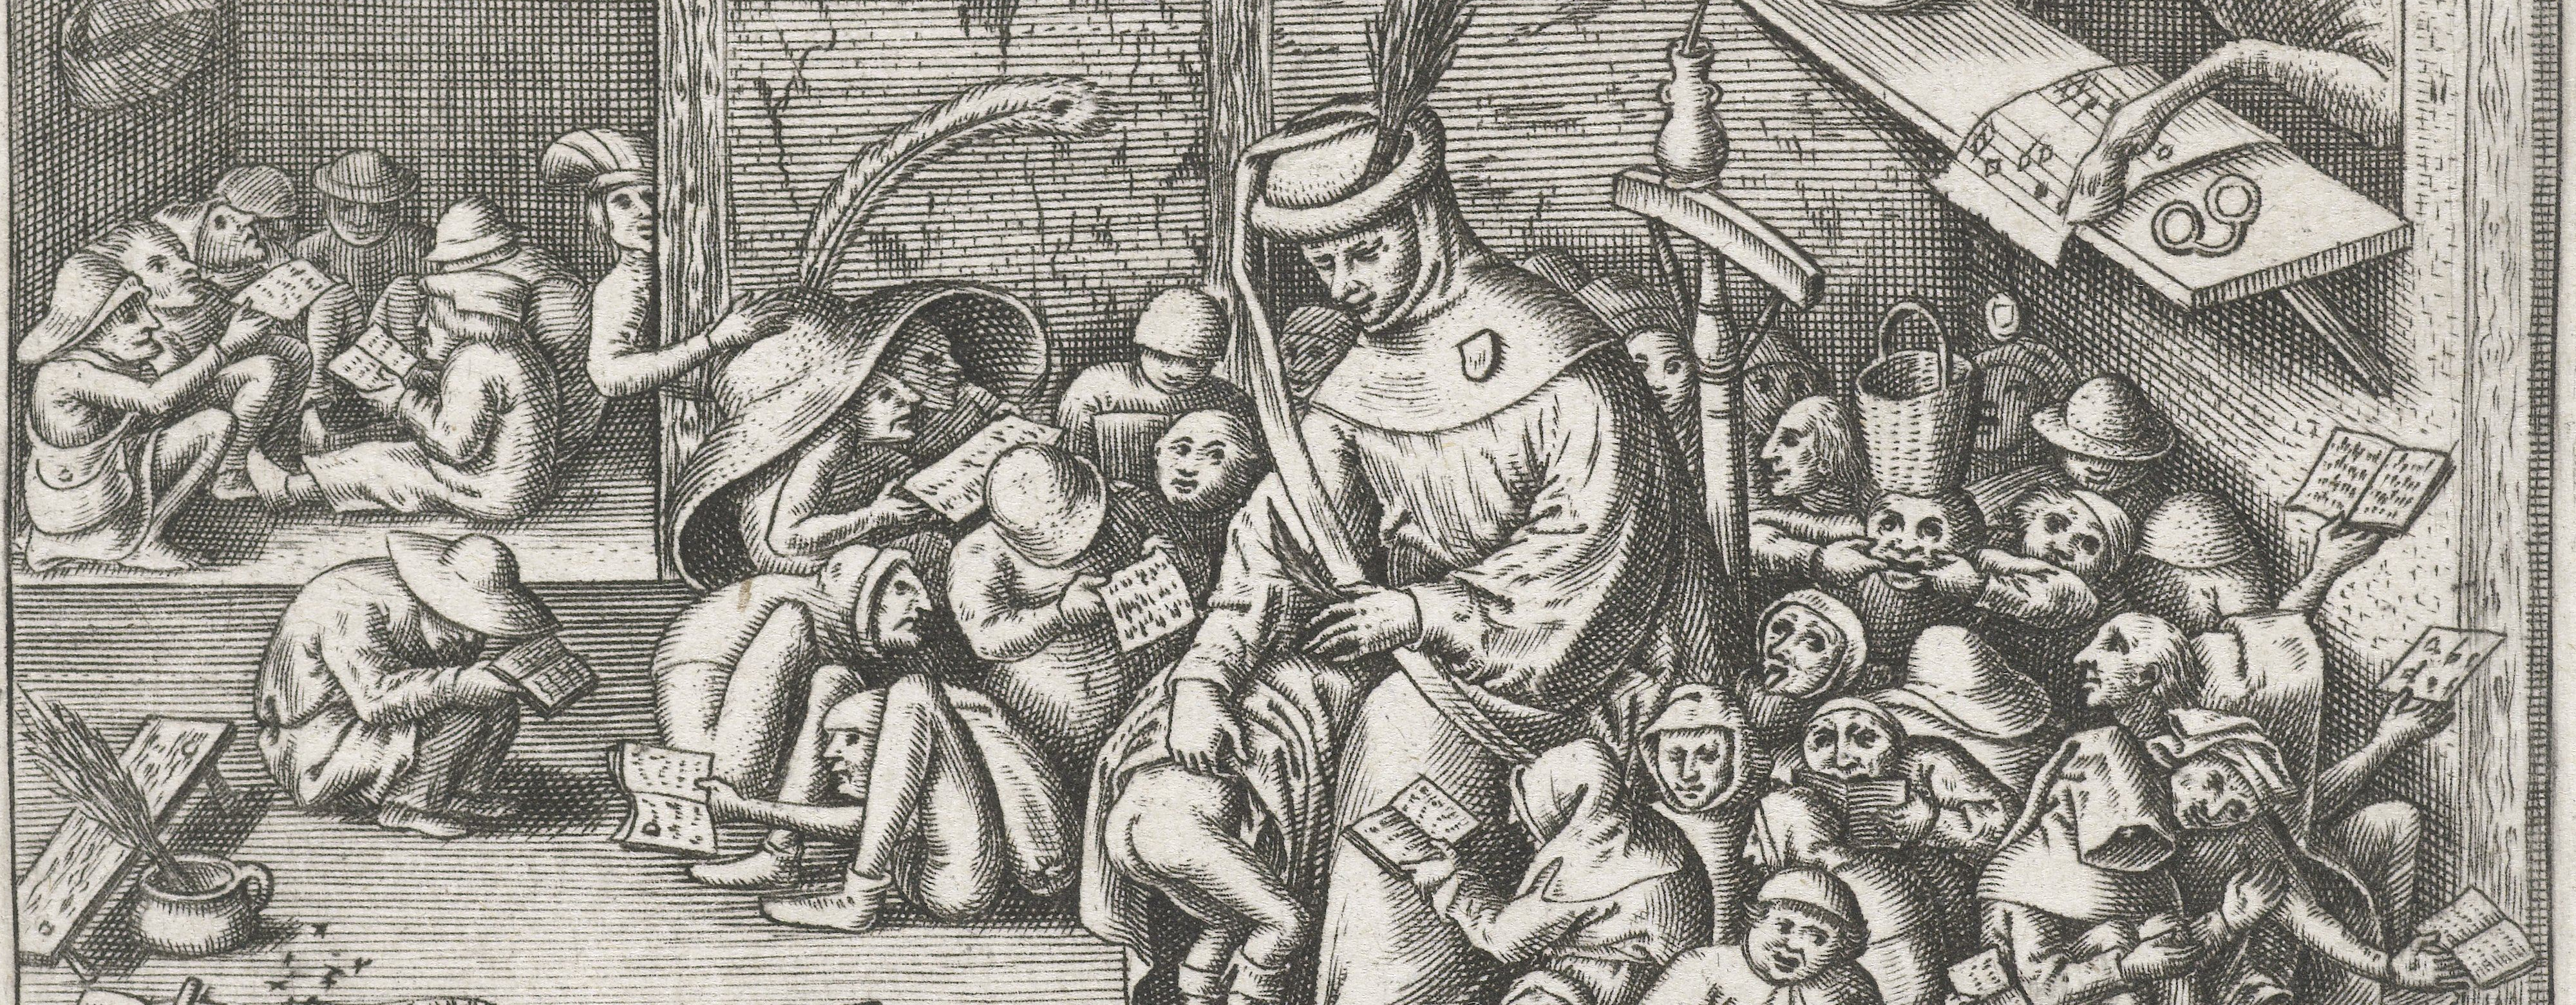 Cropped version of a print depicting the following scene: In a schoolroom several 'children' sit on the floor with books and one of them is given by the master with the rod. On the right an easel in a niche, reading by the light of a burning candle. Even if the donkey goes to school, it is still a donkey and will never turn into a horse, goes the saying. Its purport is that someone who has no qualities will never get very far.